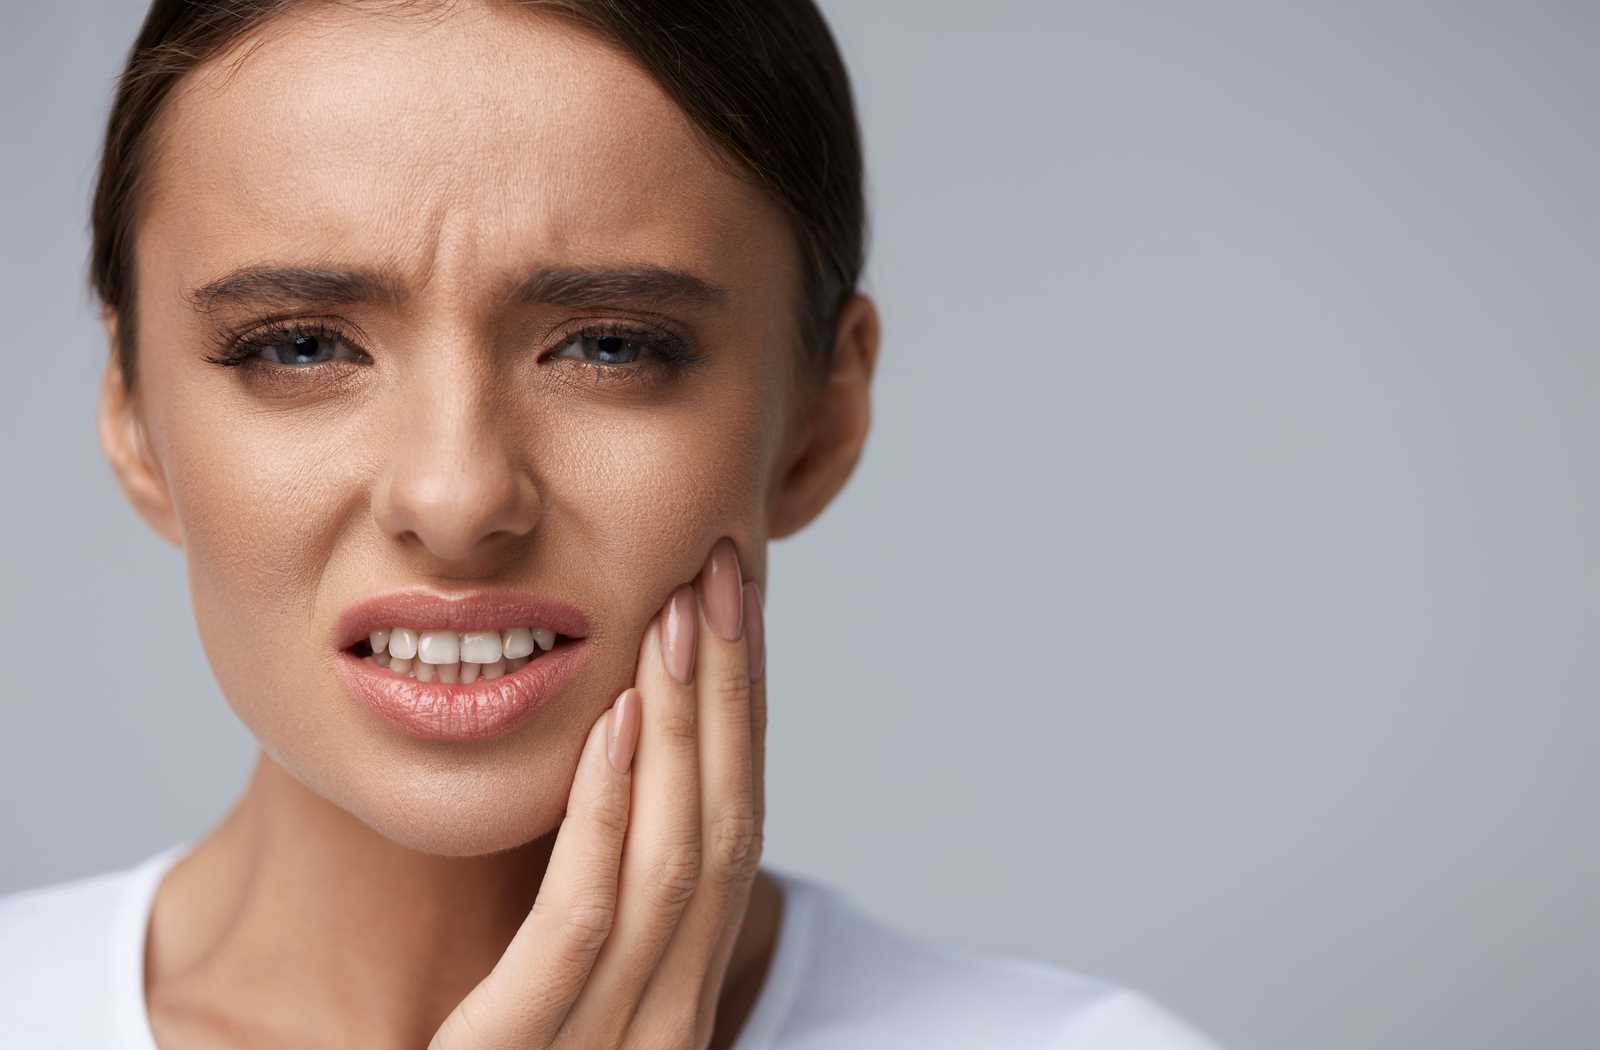 Top 5 Most Common Dental Problems